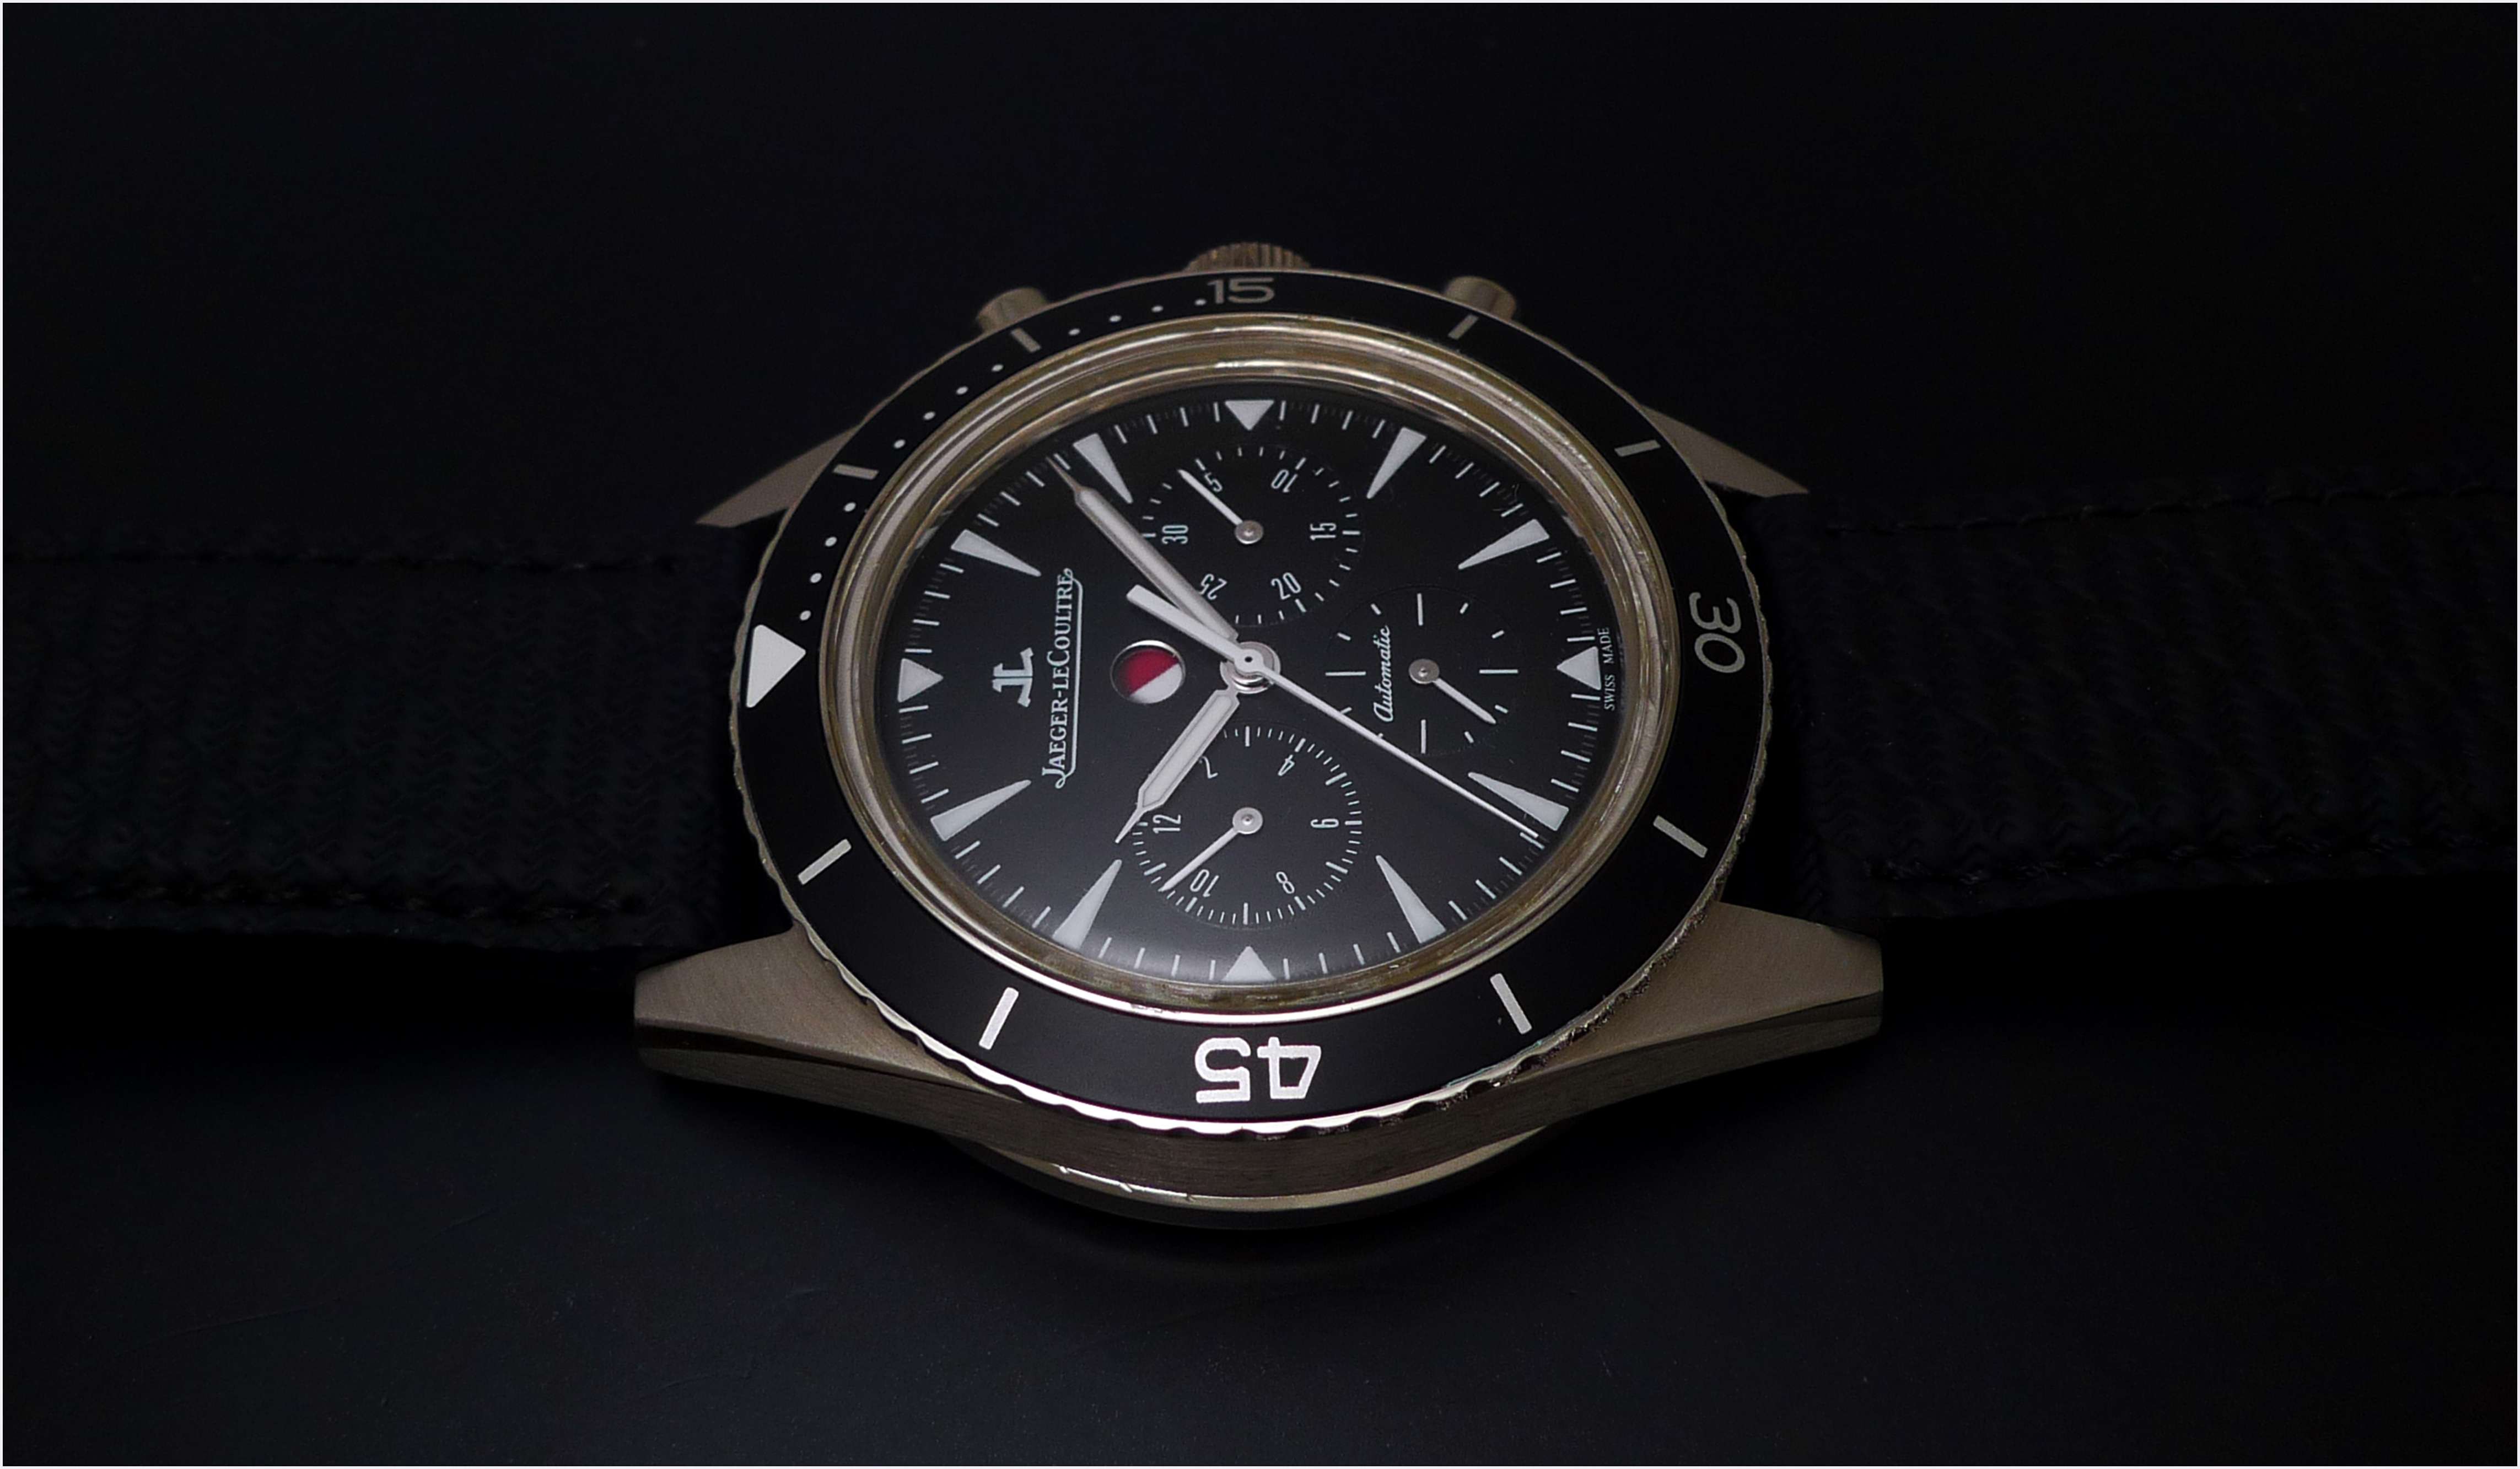 JLC - Jaeger Lecoultre Deep Sea Chronograph Cermet: An on the wrist and  road trip review.